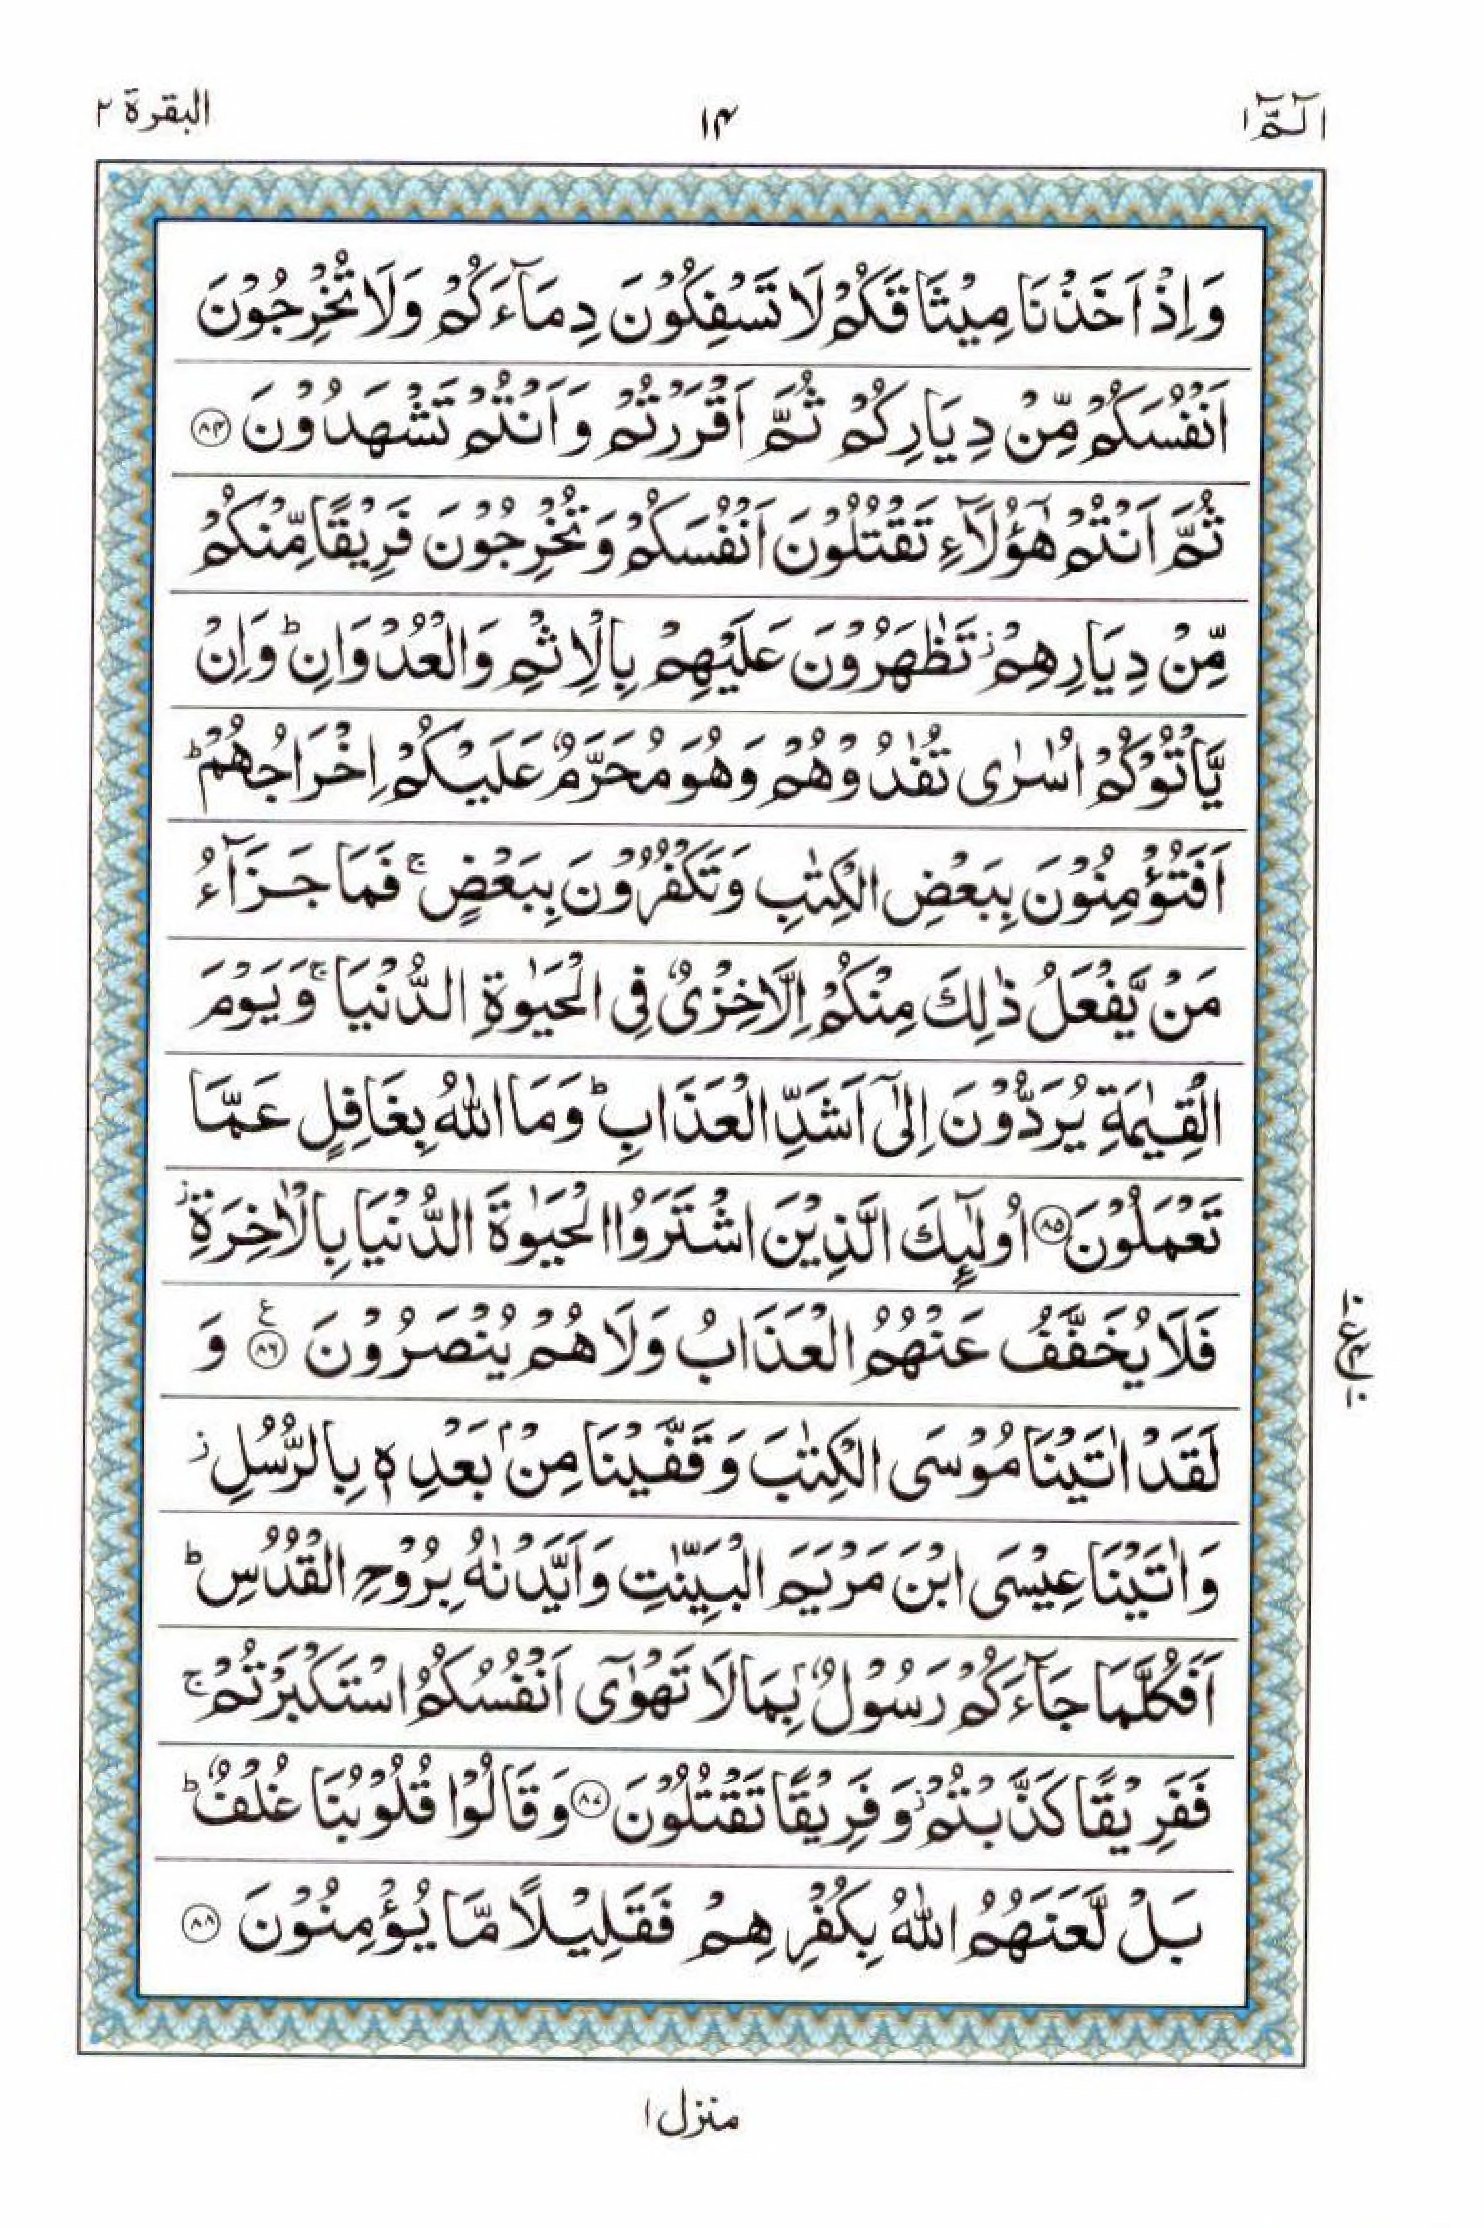 Read 15 Lines Quran, Part / Chapter / Siparah 1 Page 14